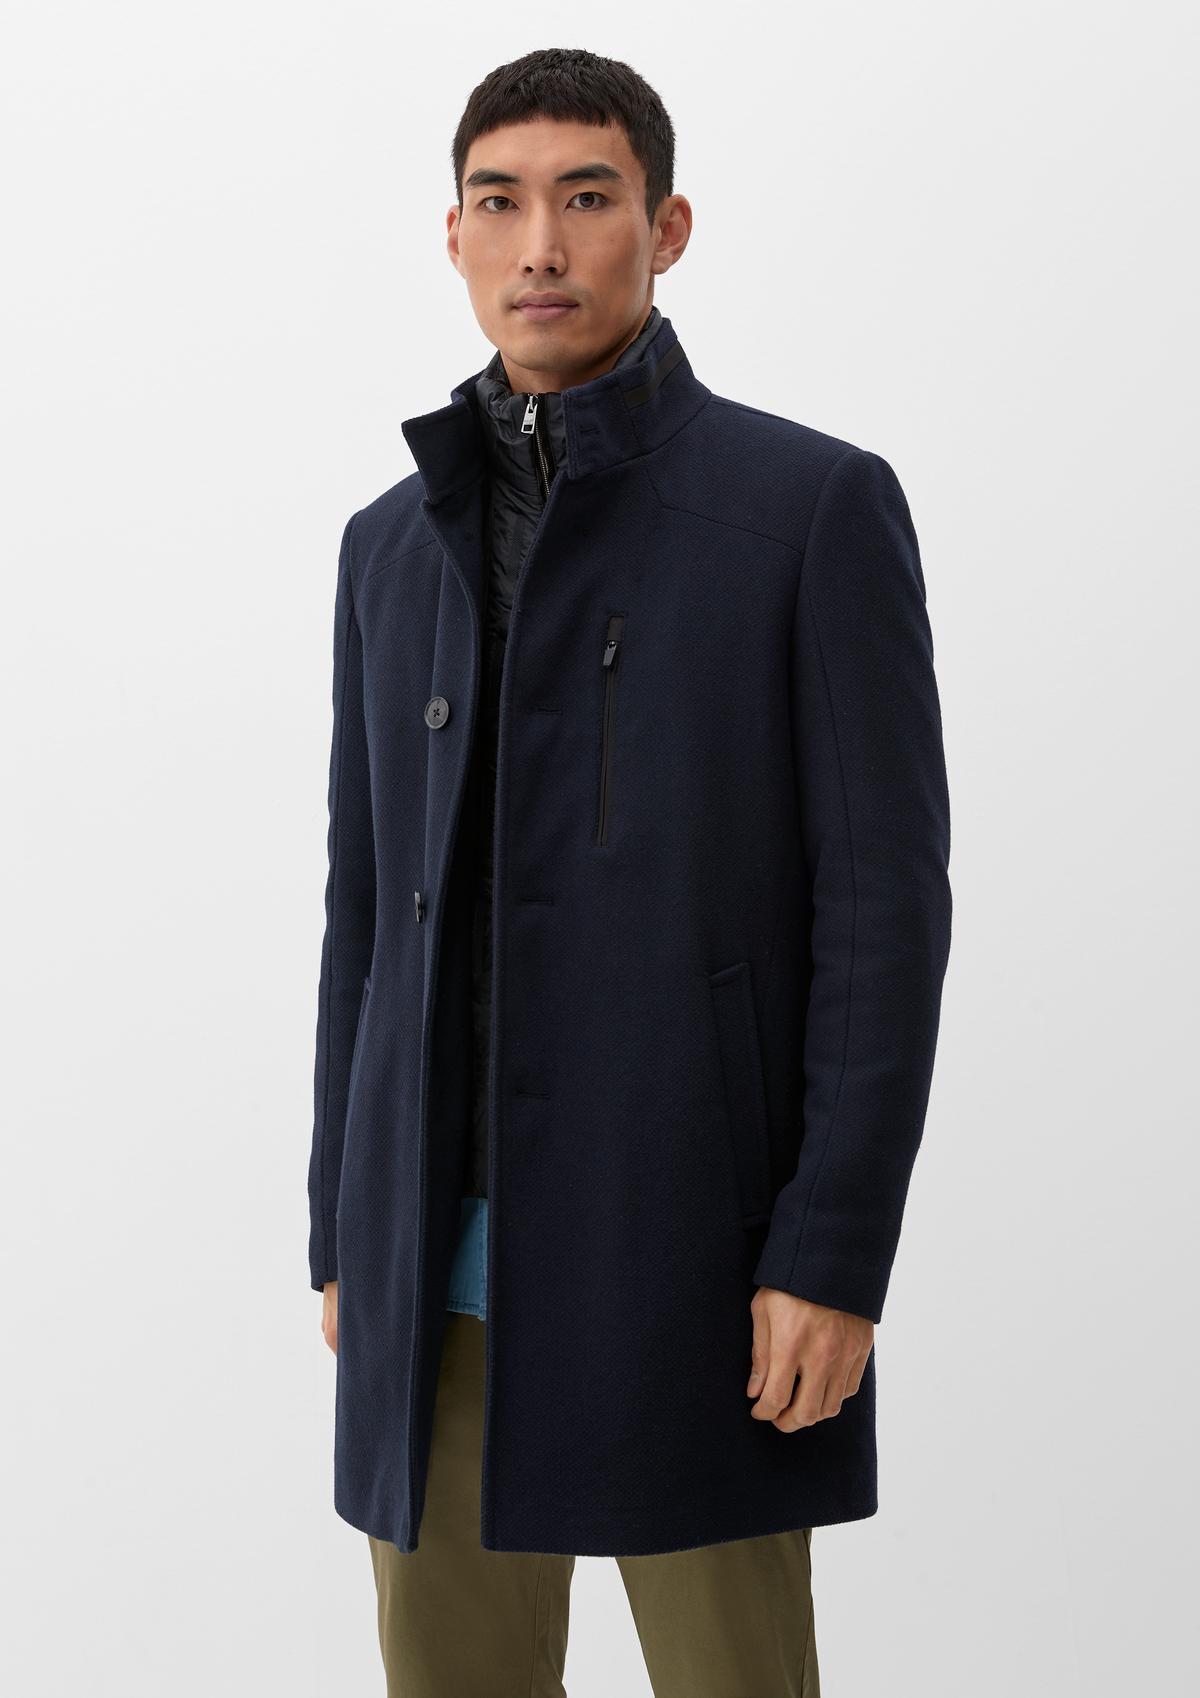 Wool blend coat with a stand-up collar